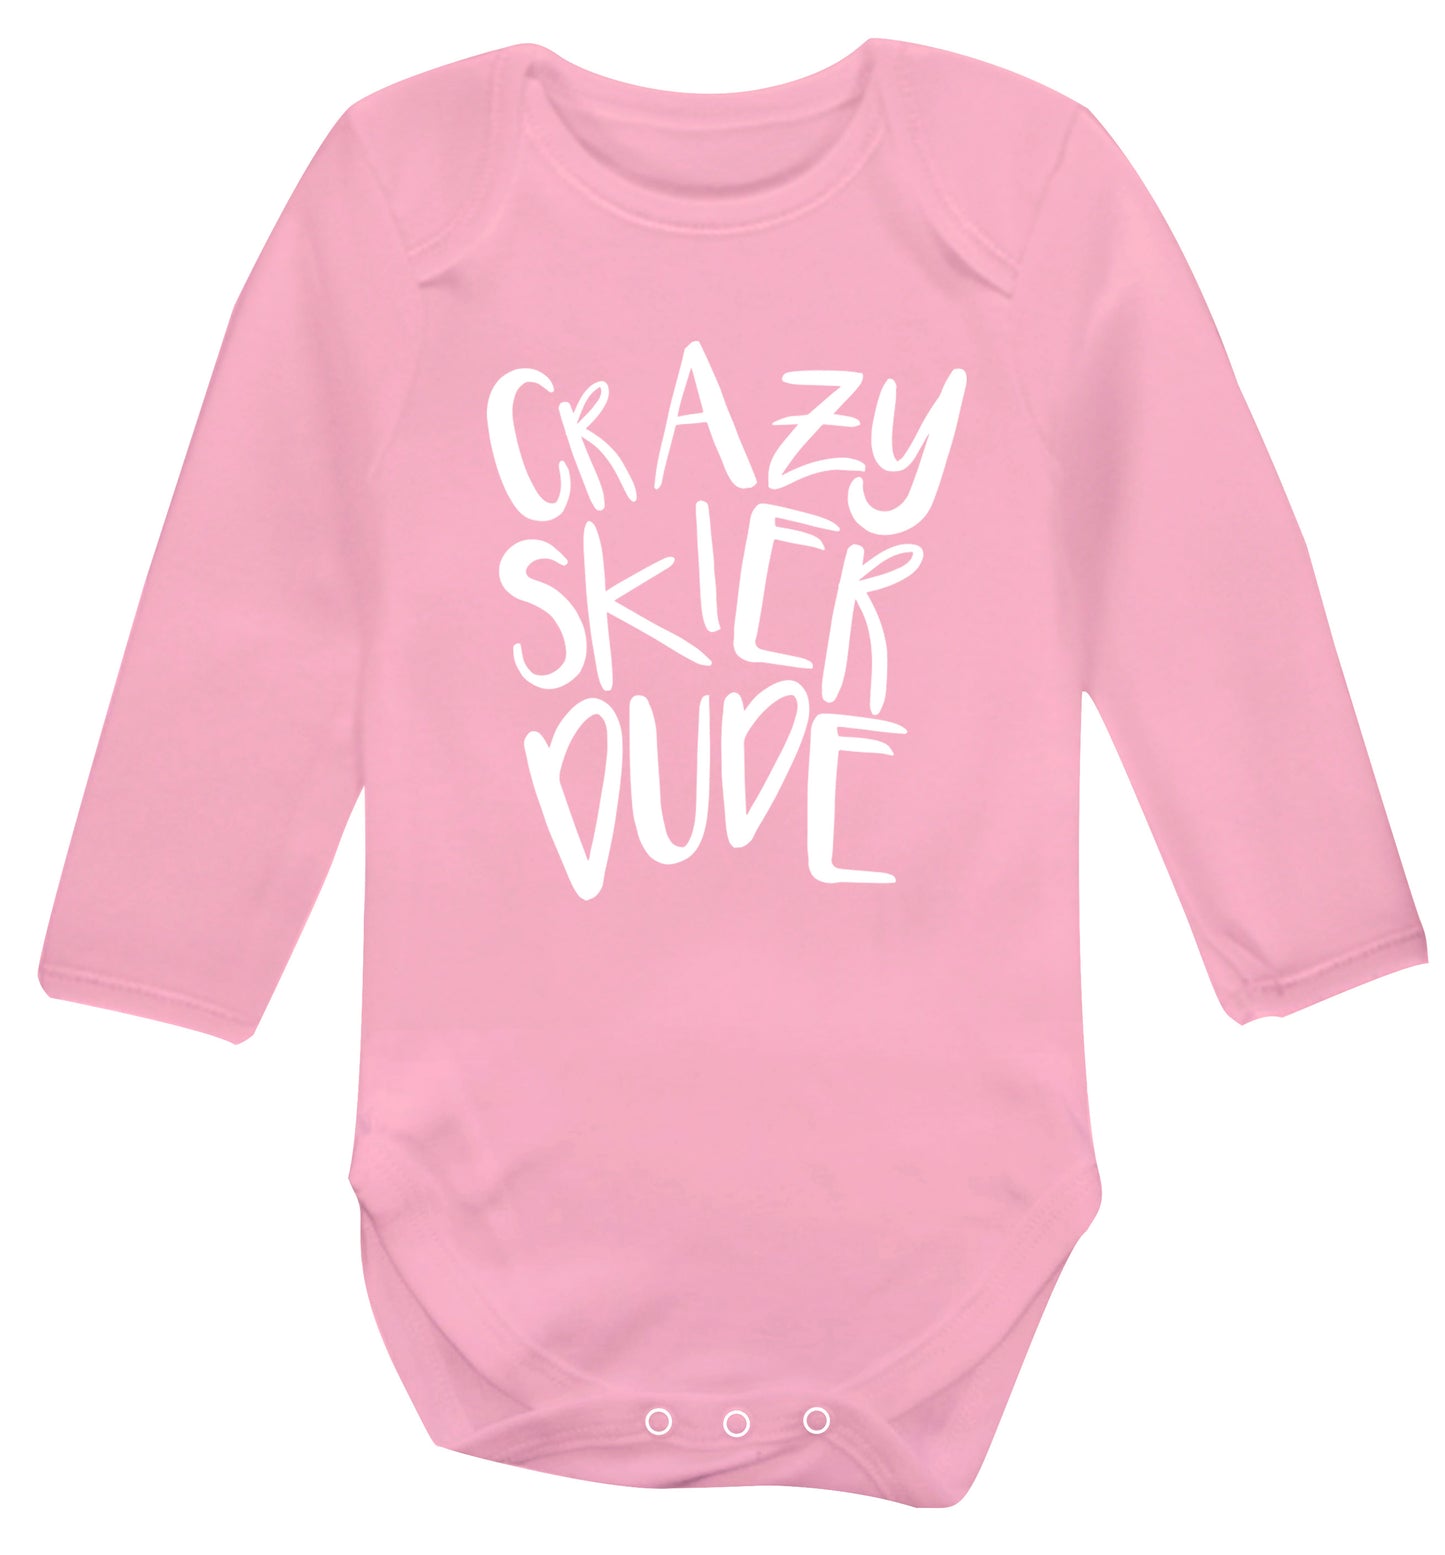 Crazy skier dude Baby Vest long sleeved pale pink 6-12 months